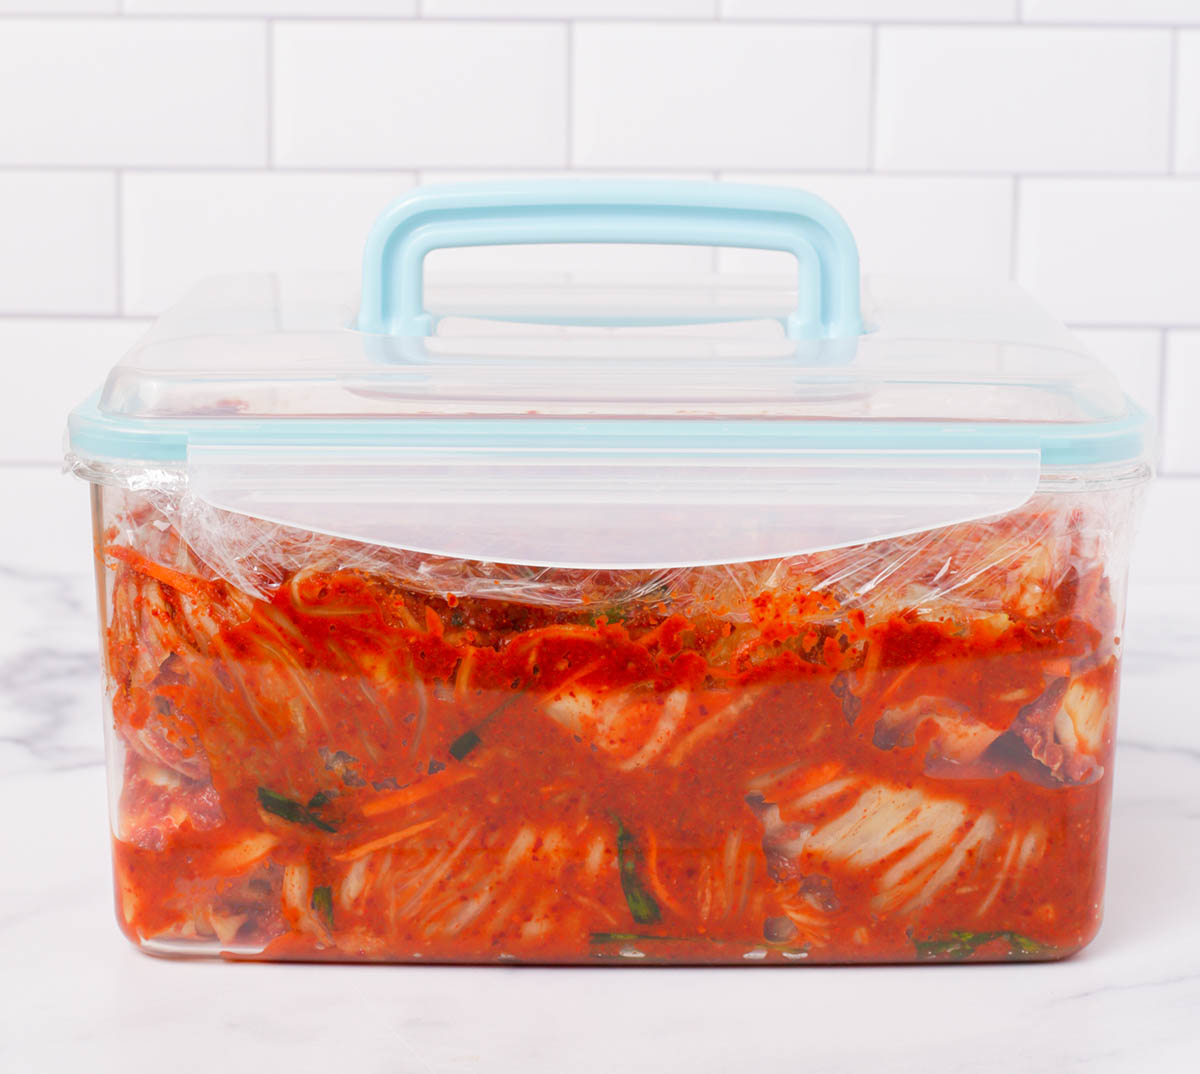 Kimchi packed in container.